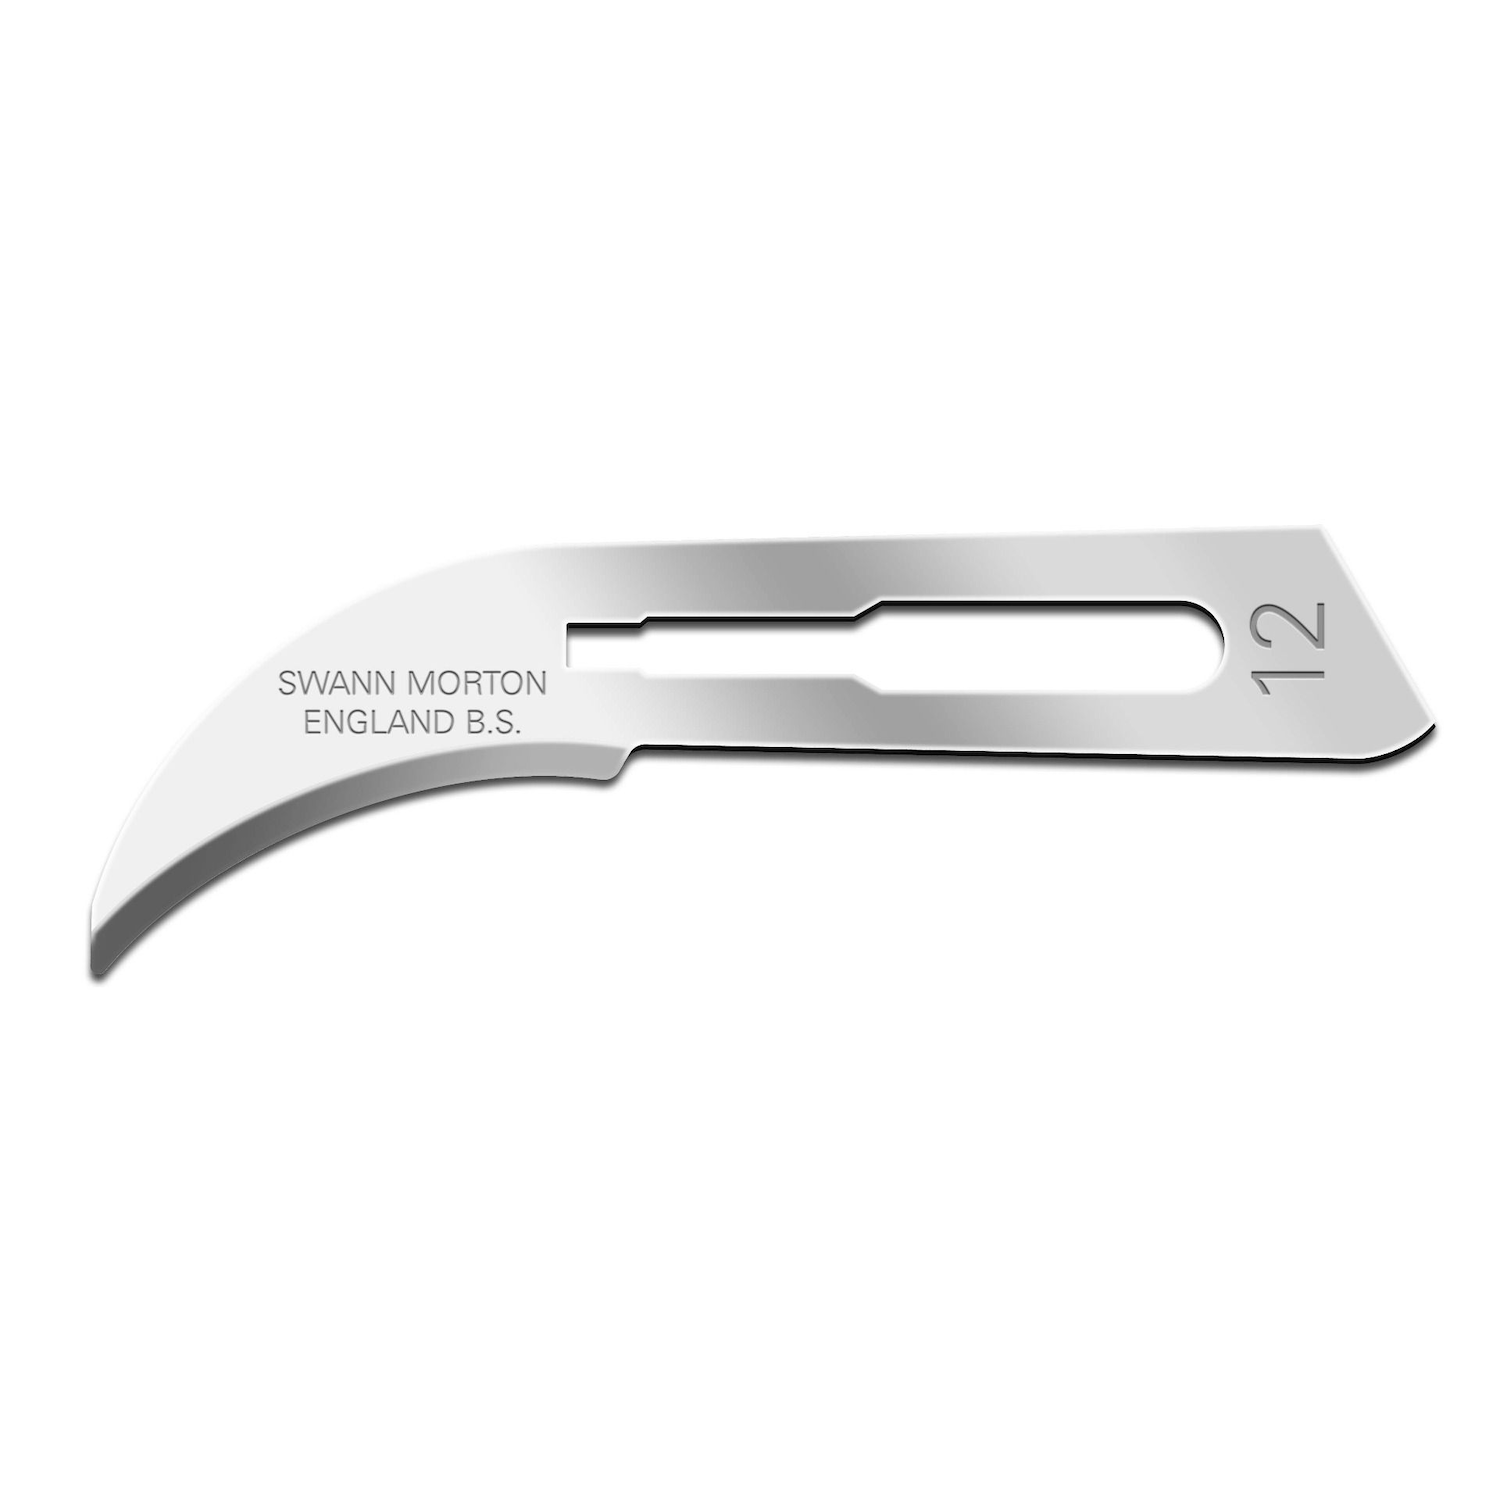 Swann Morton Carbon Steel Surgical Blades | No.12 | Sterile | Pack of 100